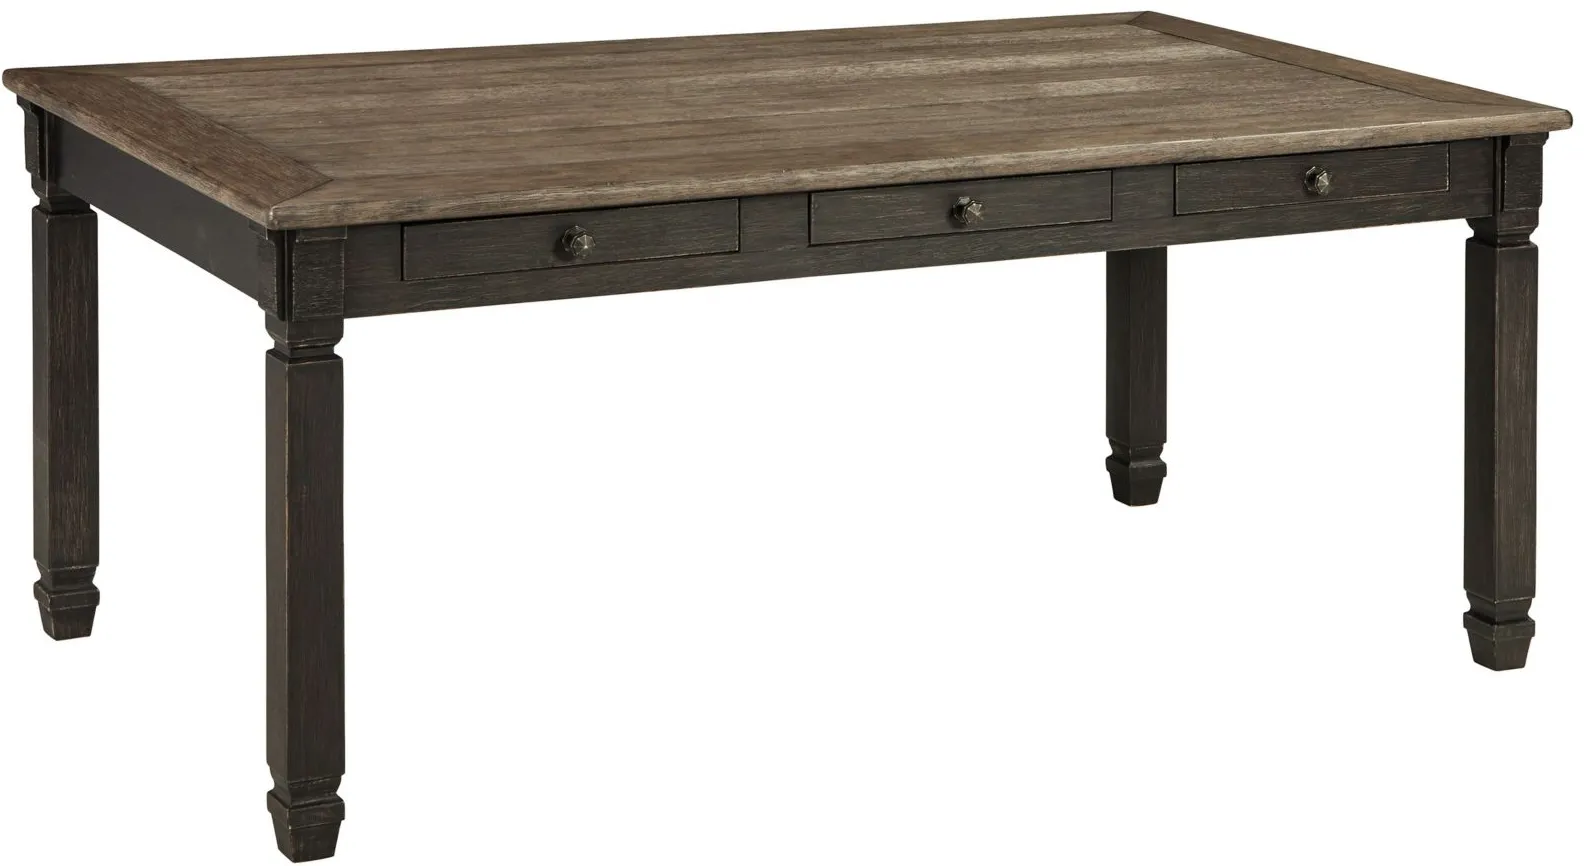 Vail Dining Table in Black by Ashley Furniture